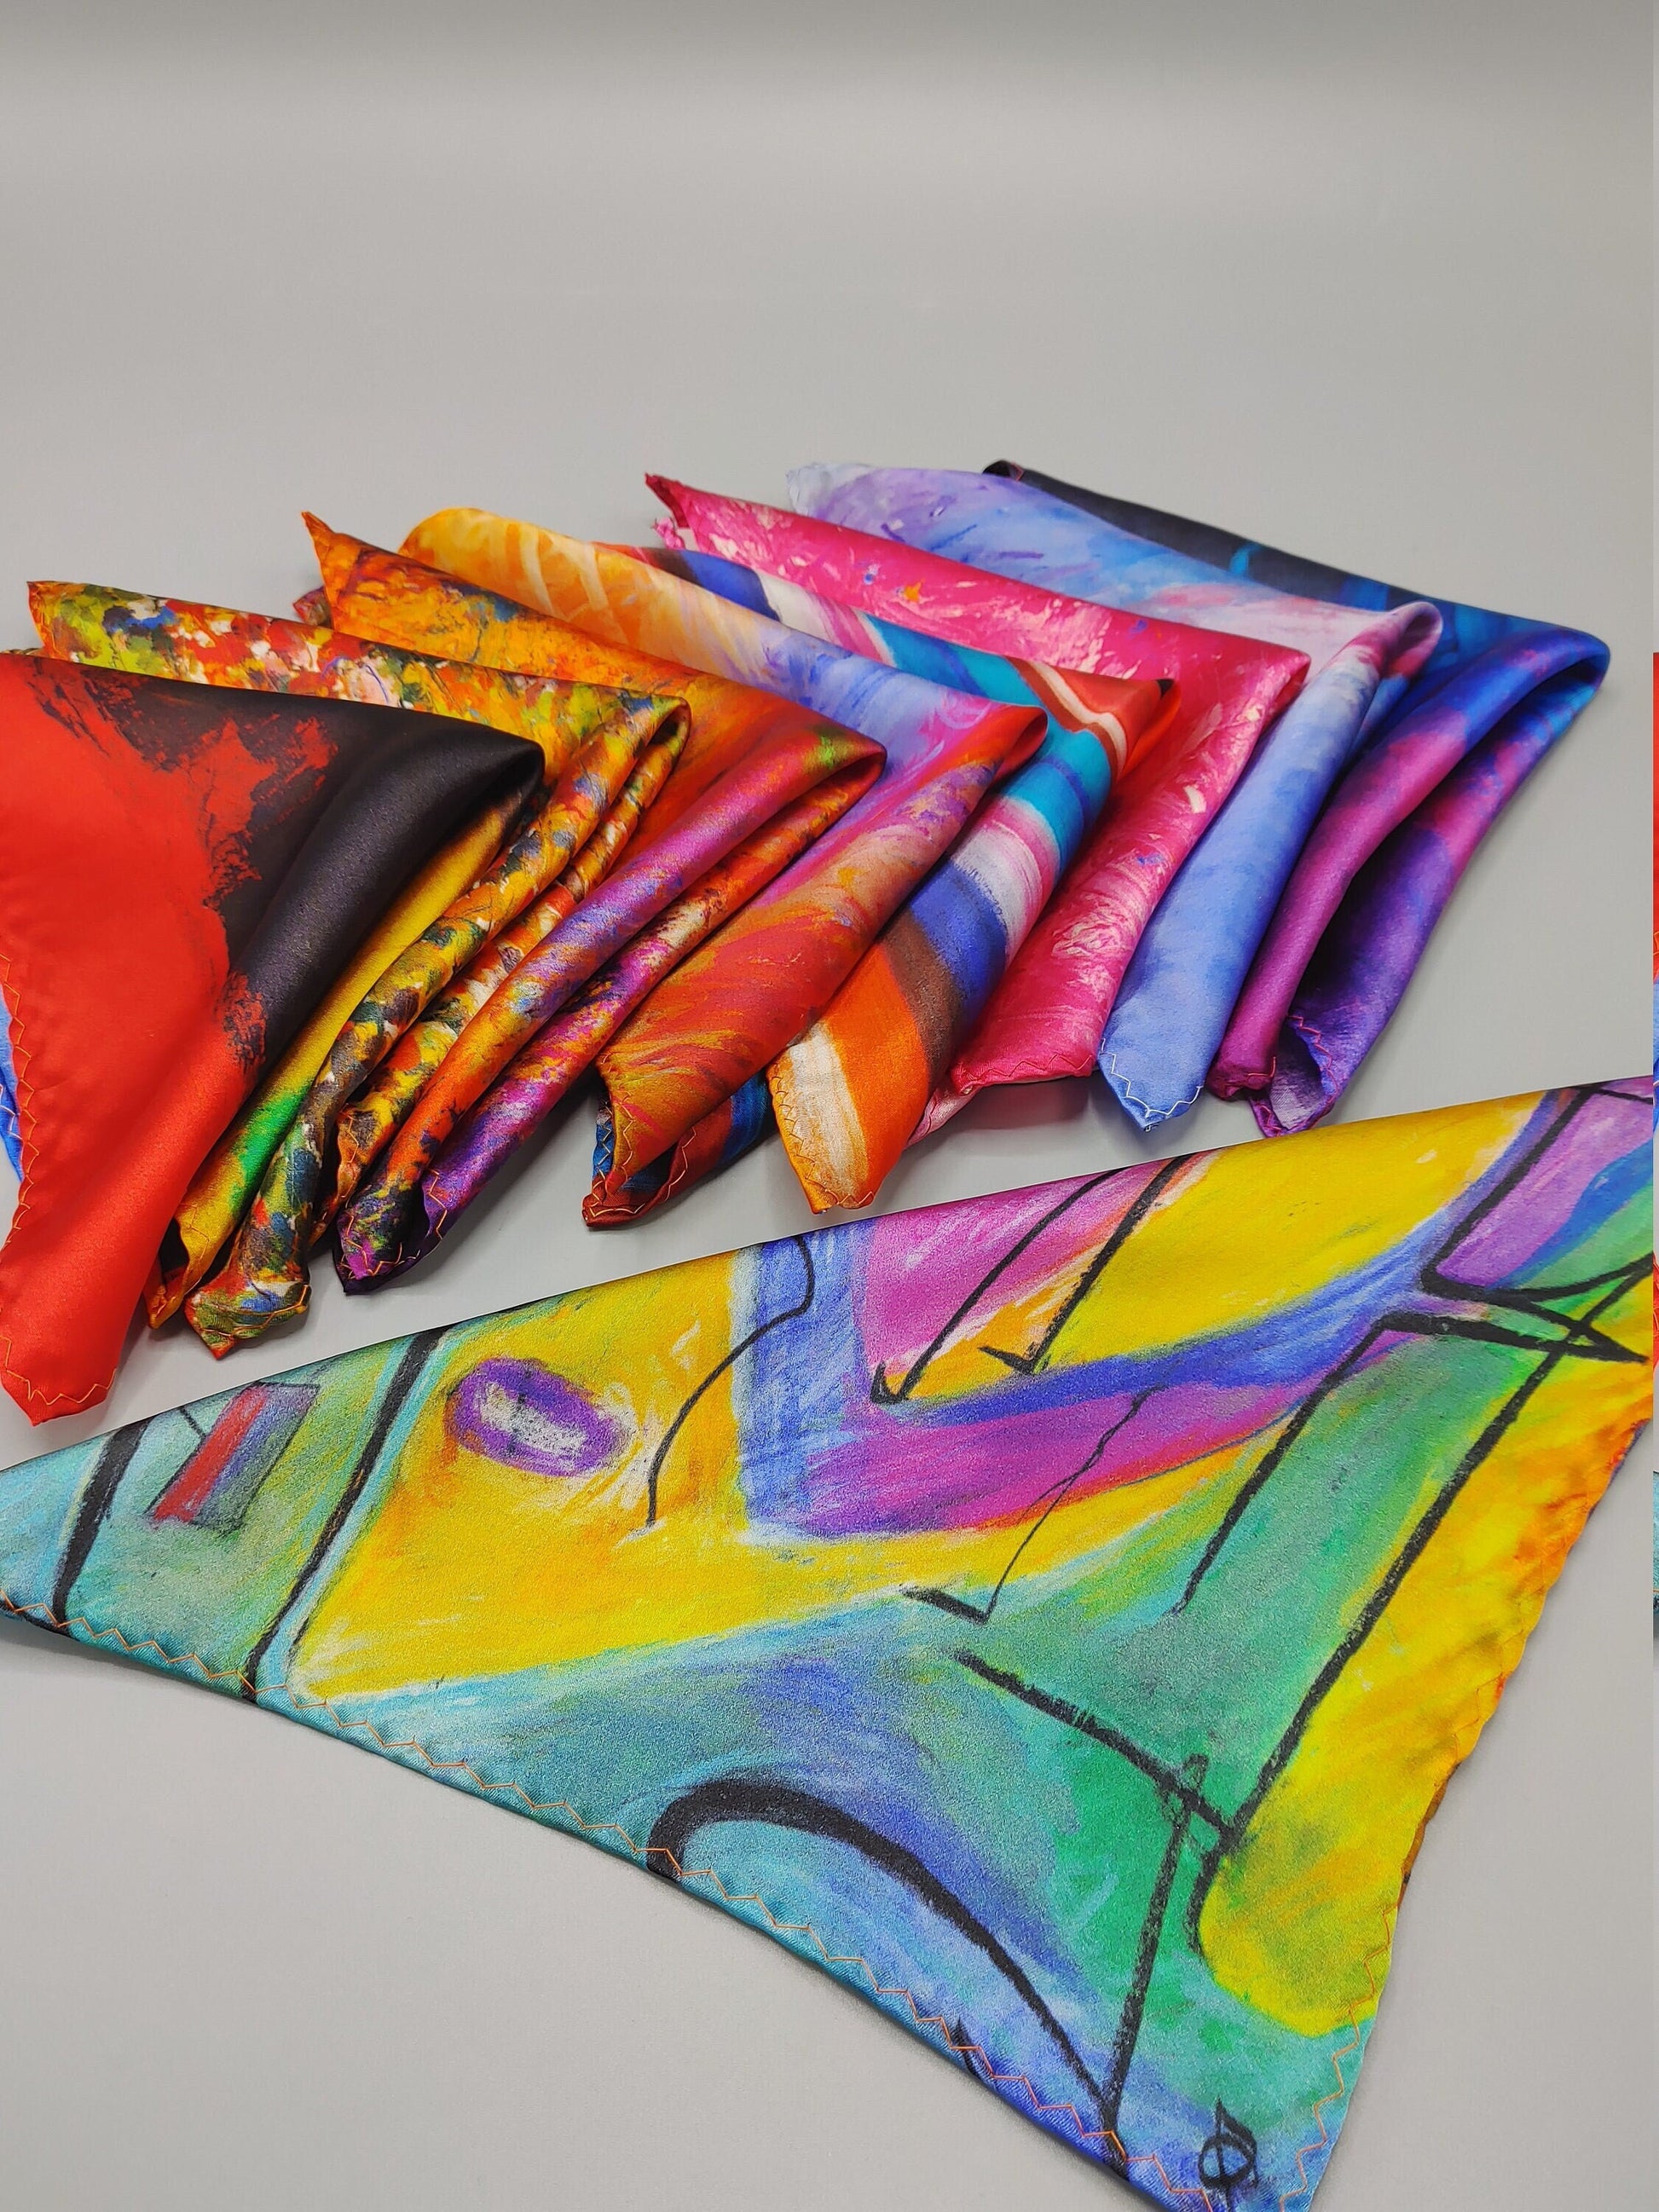 100% Silk handkerchief scarf pocket square art print inspired by Bruce Mishell